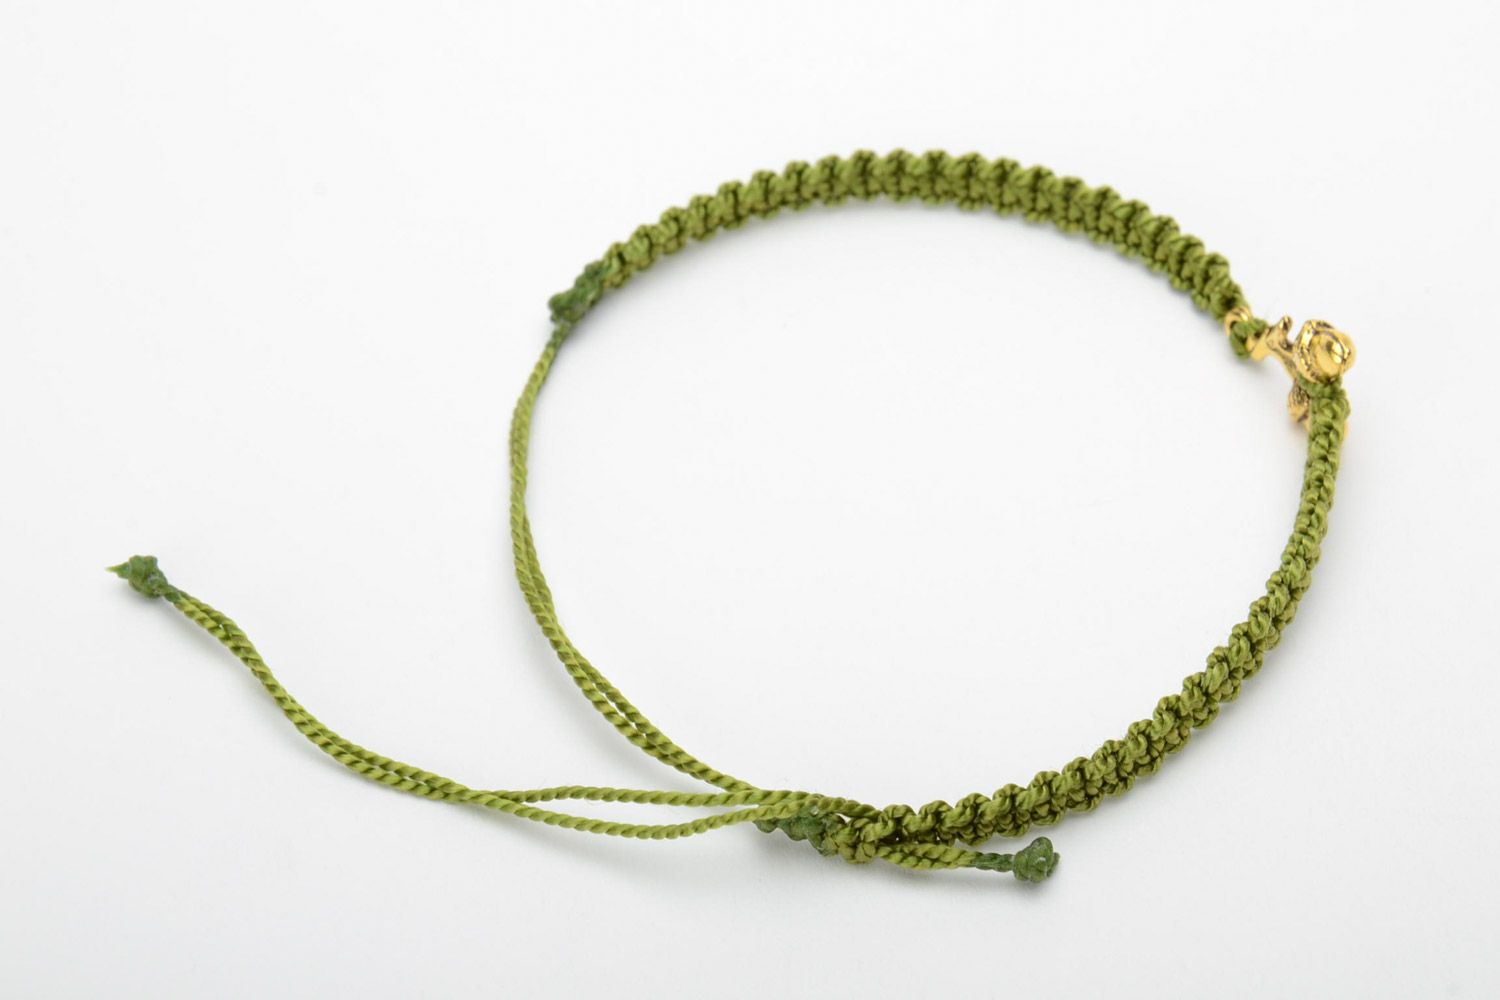 Women's handmade macrame woven thread bracelet of green color with metal charms in the shape of acorns photo 4